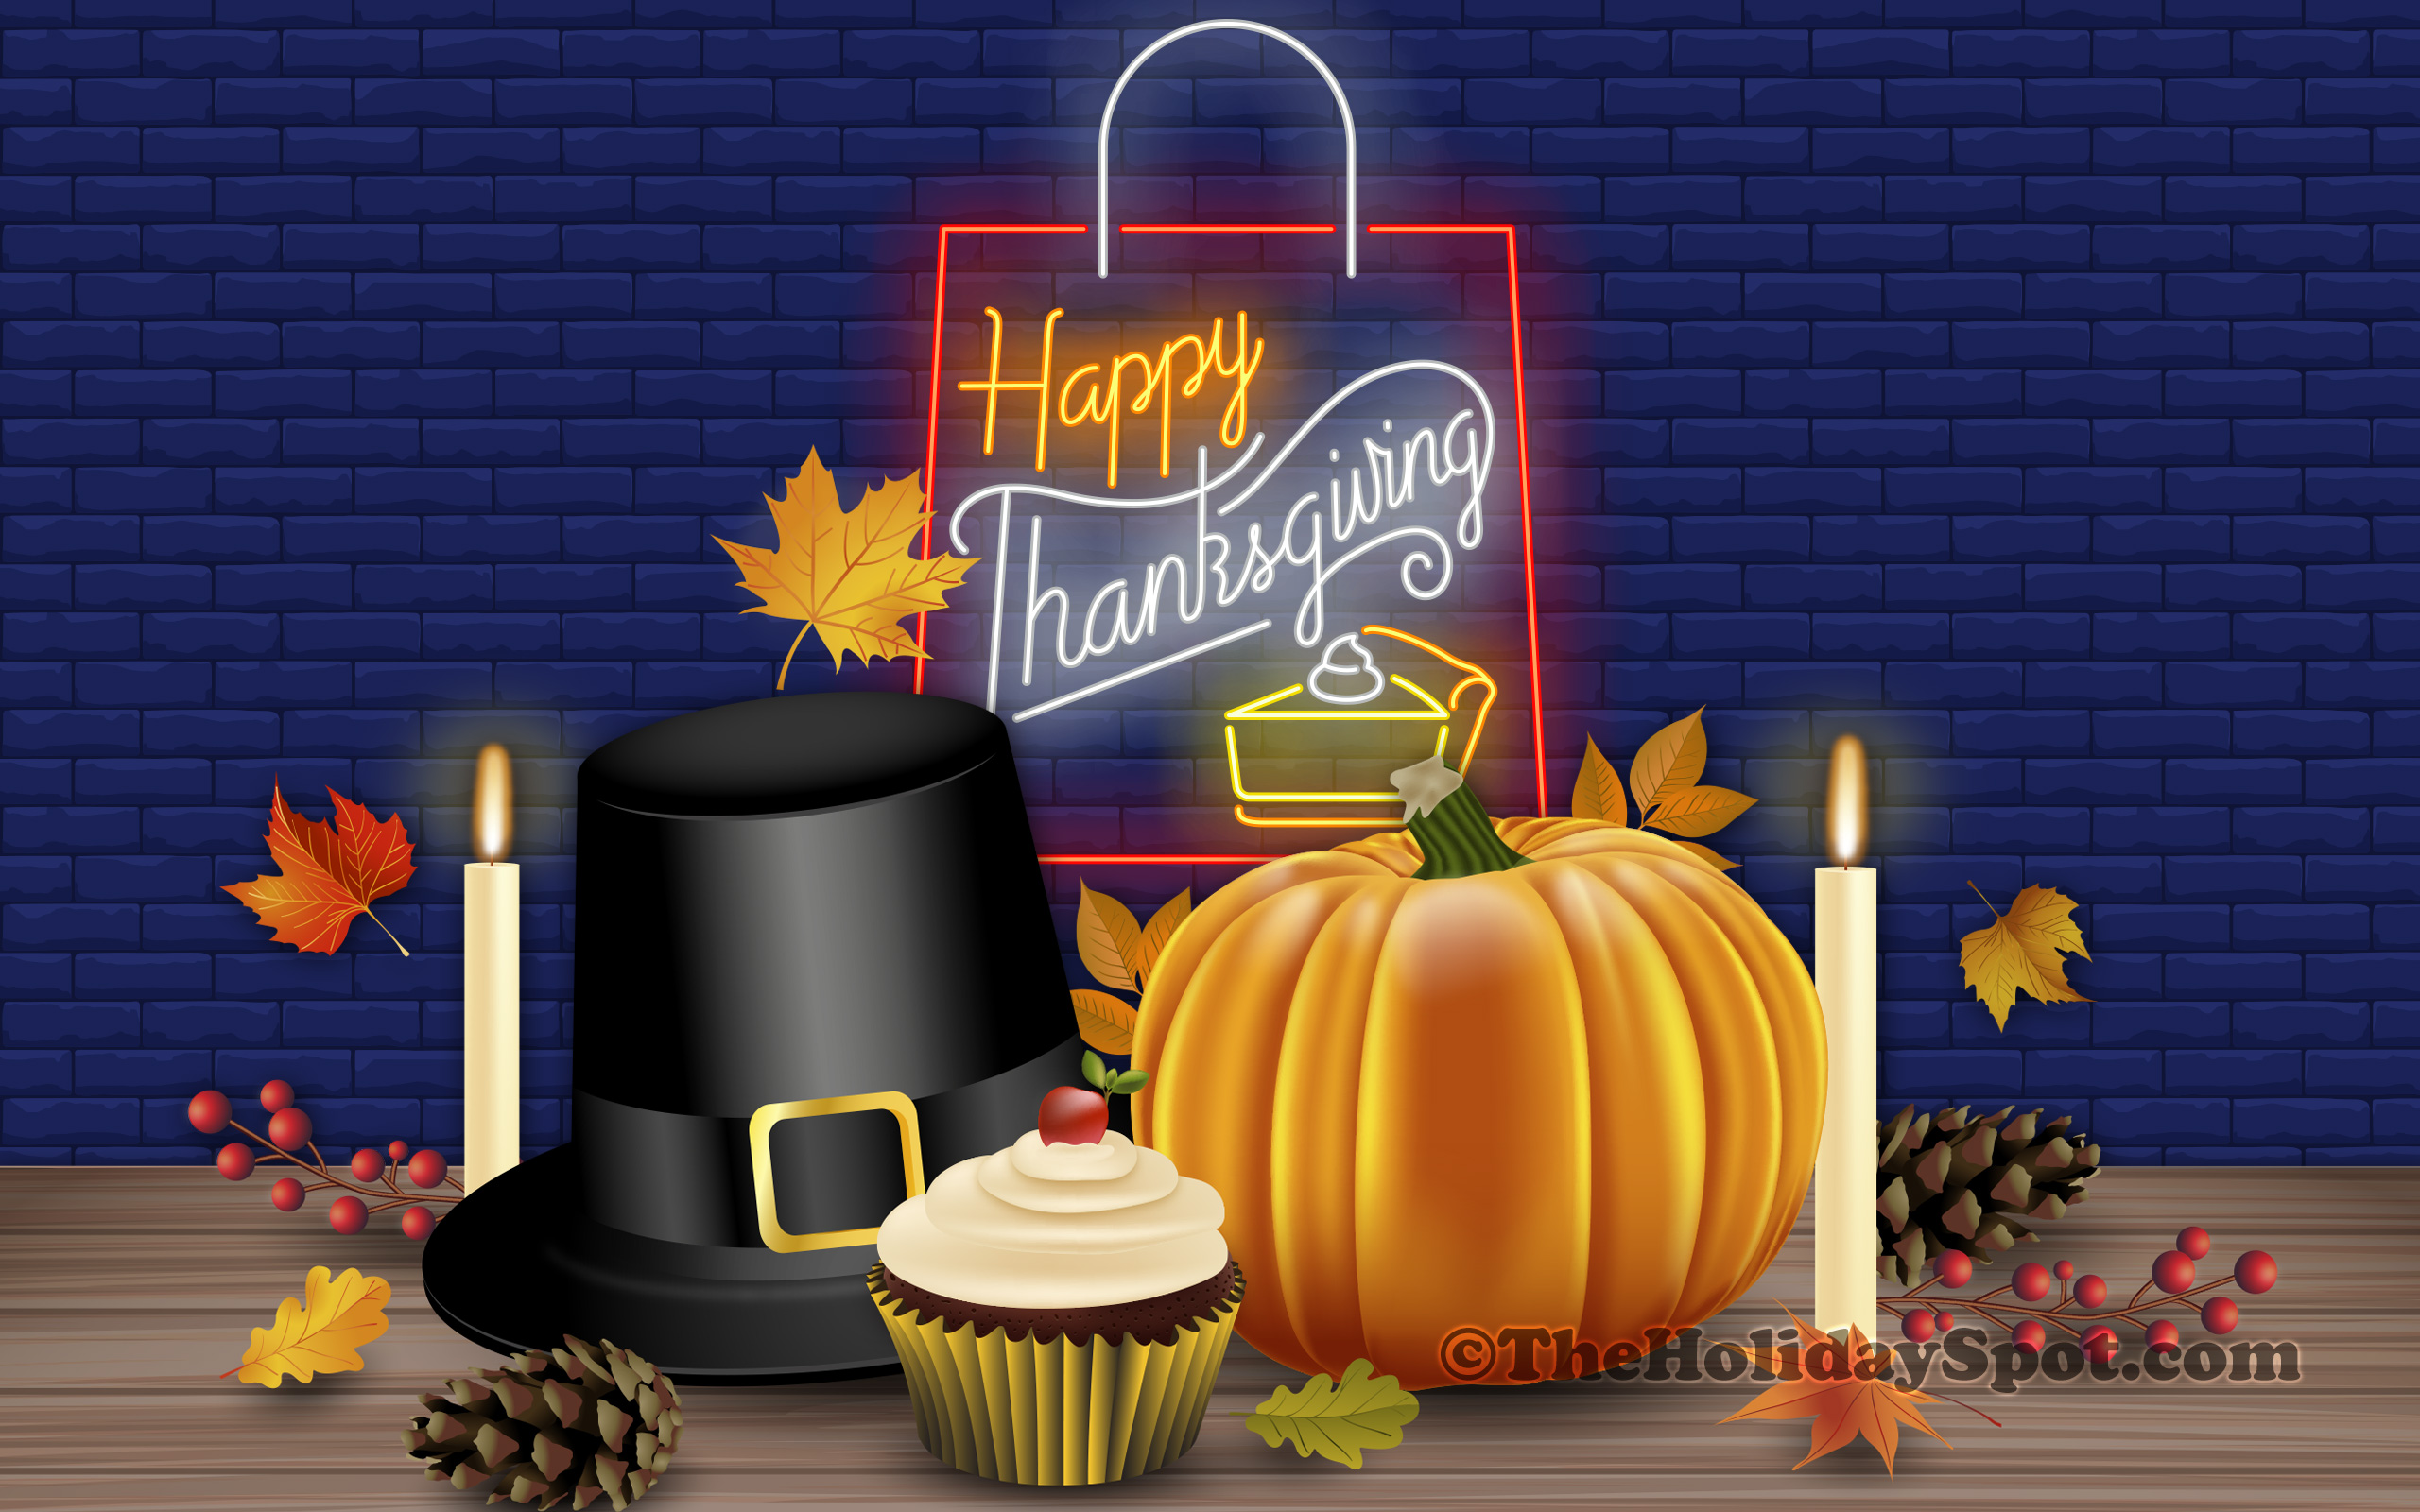 Hd Colorful Wallpaper With Glowing Happy Thanksgiving - Thanksgiving - HD Wallpaper 